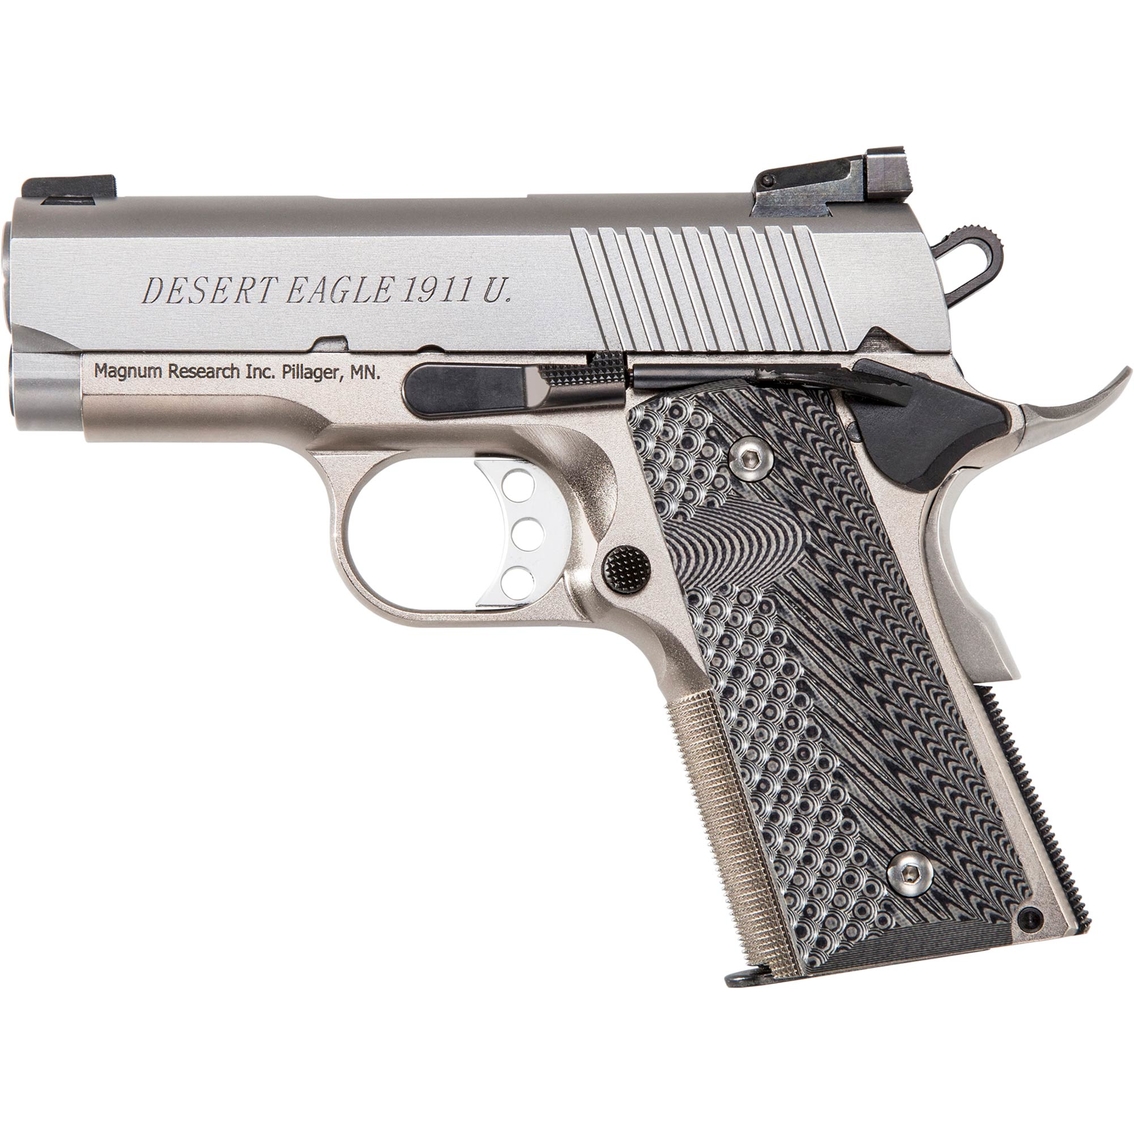 Magnum Research 1911USS Undercover 45 ACP 3 in. Barrel 6 Rds Pistol Stainless Steel - Image 2 of 2